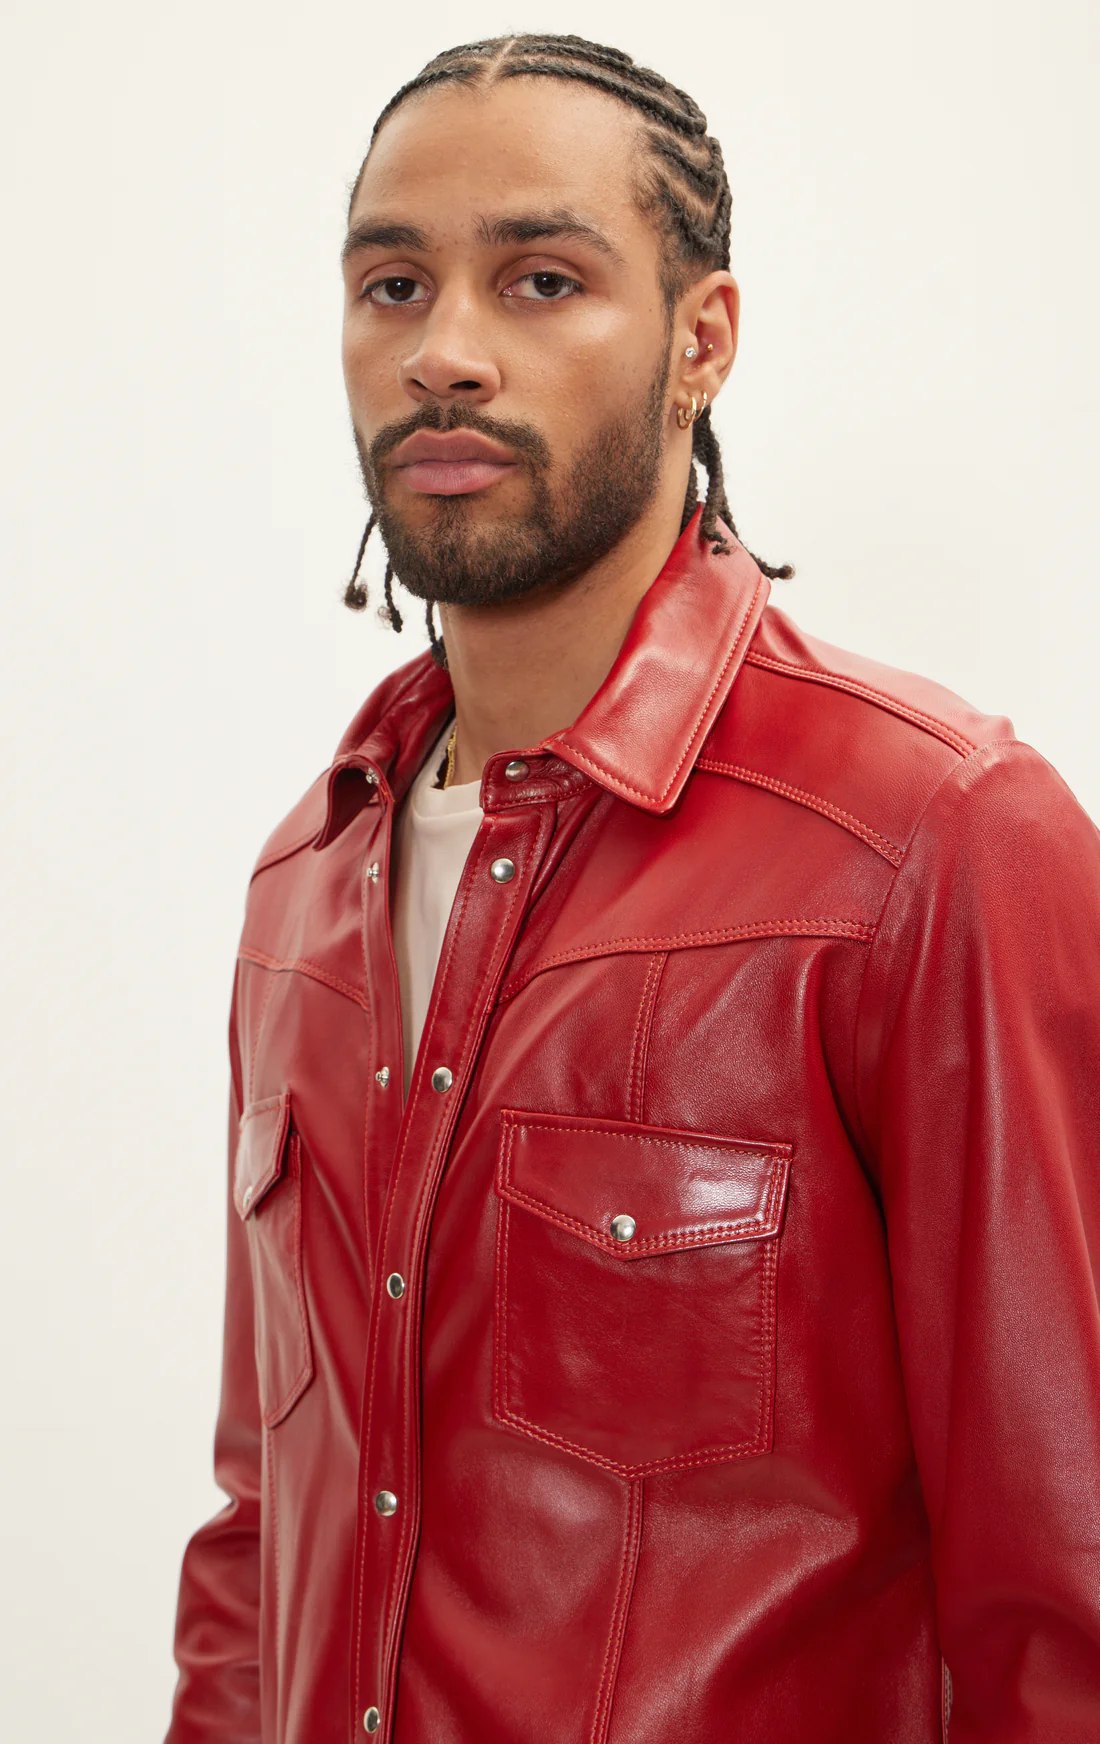 mens red leather jackets 